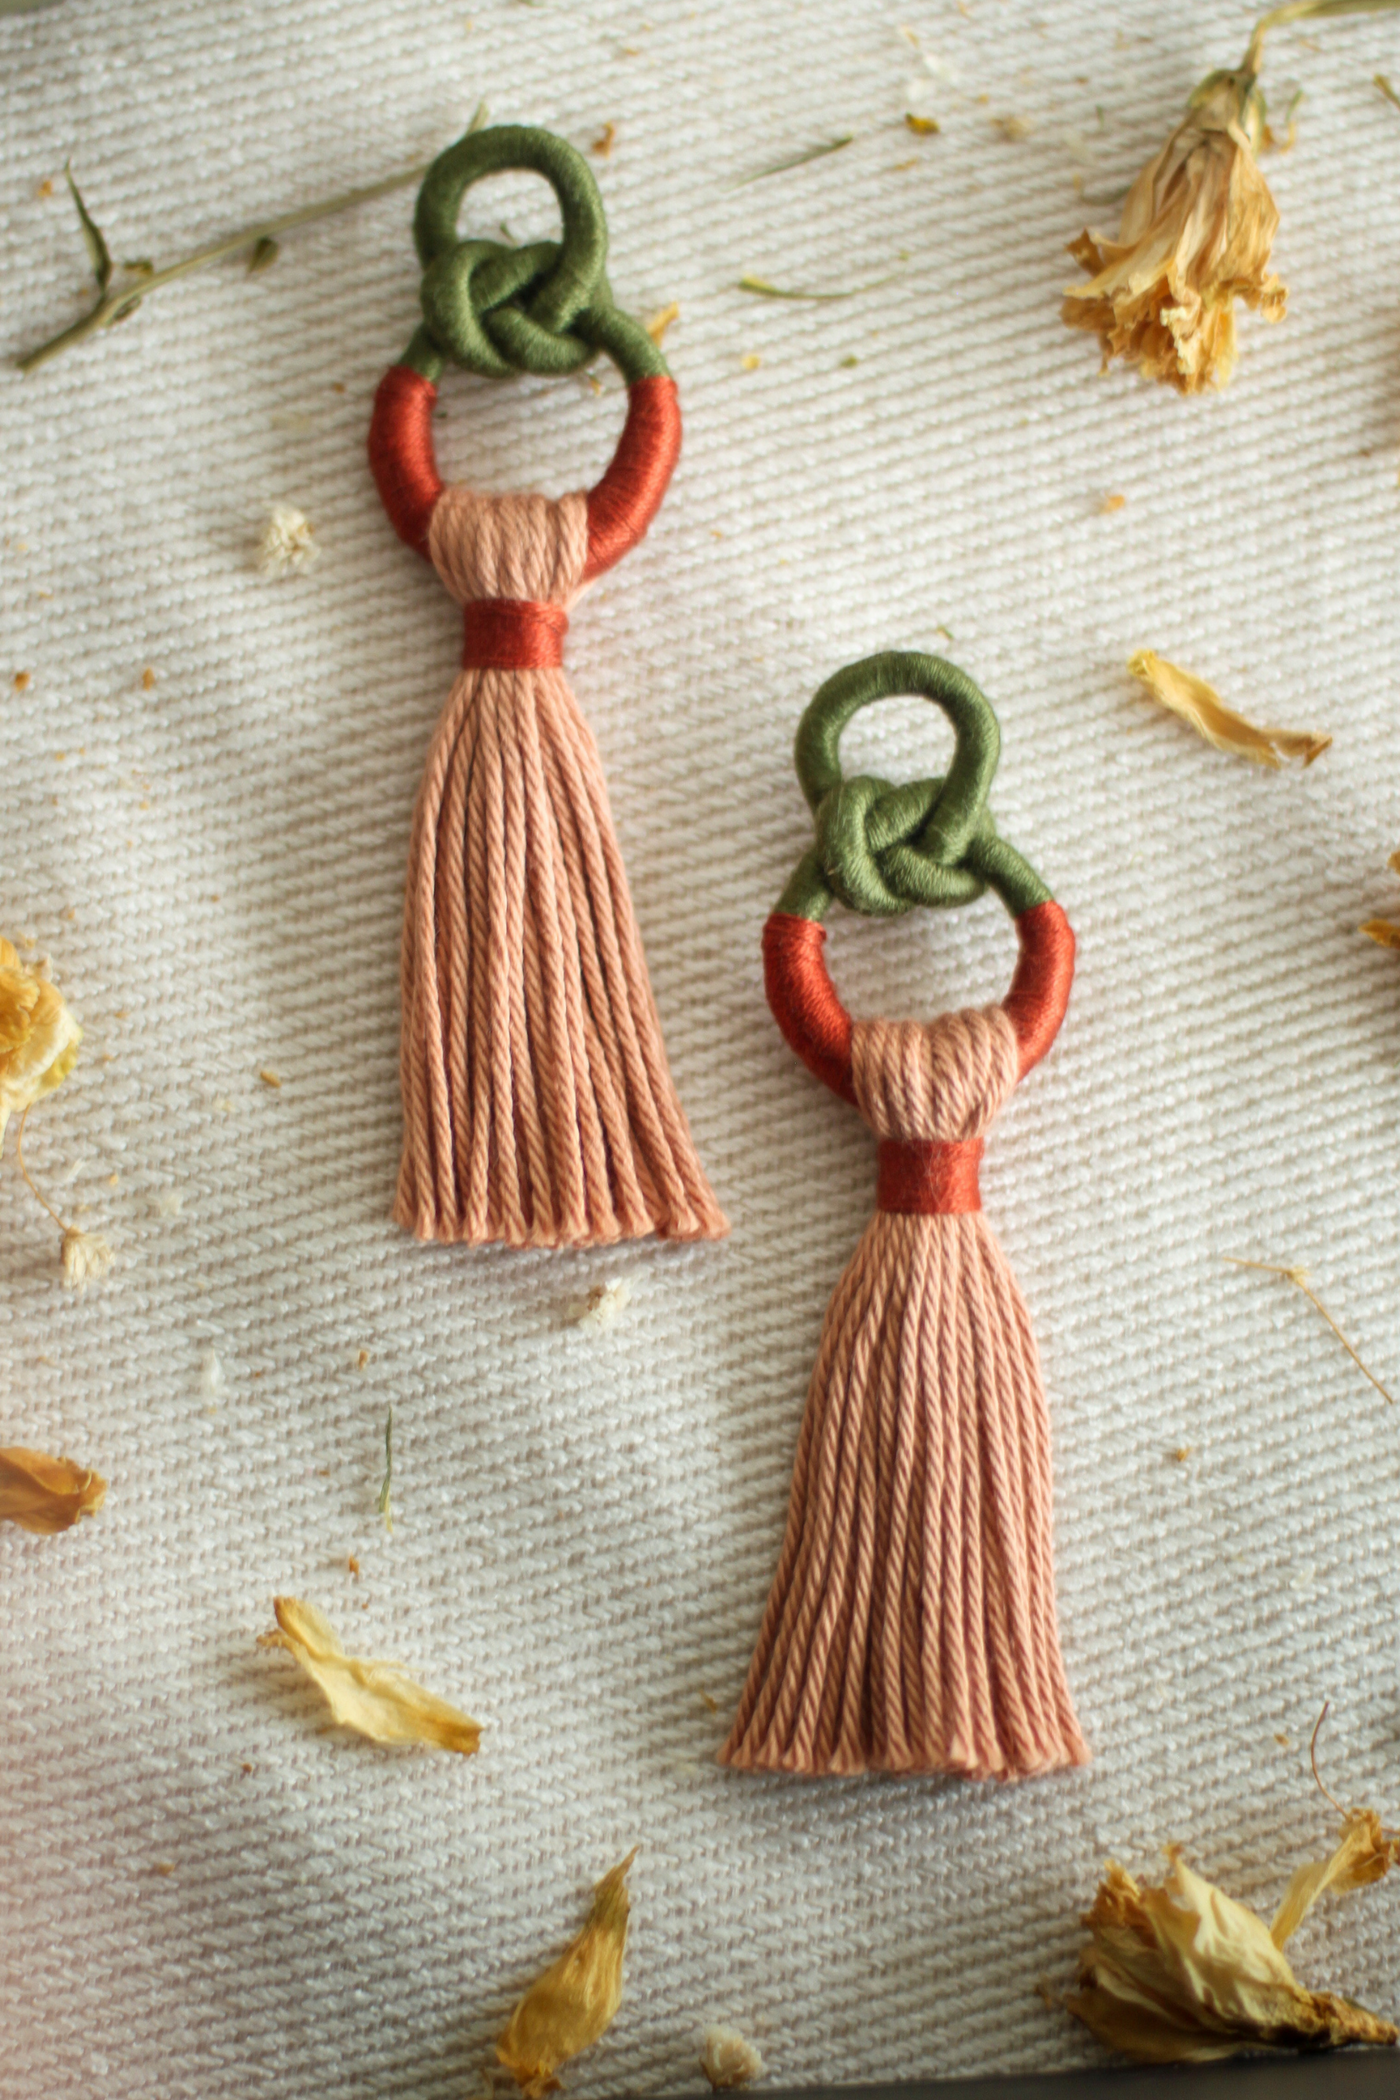 Talee Zia Knot Earrings in Pine & Apricot, available on ZERRIN with free Singapore shipping